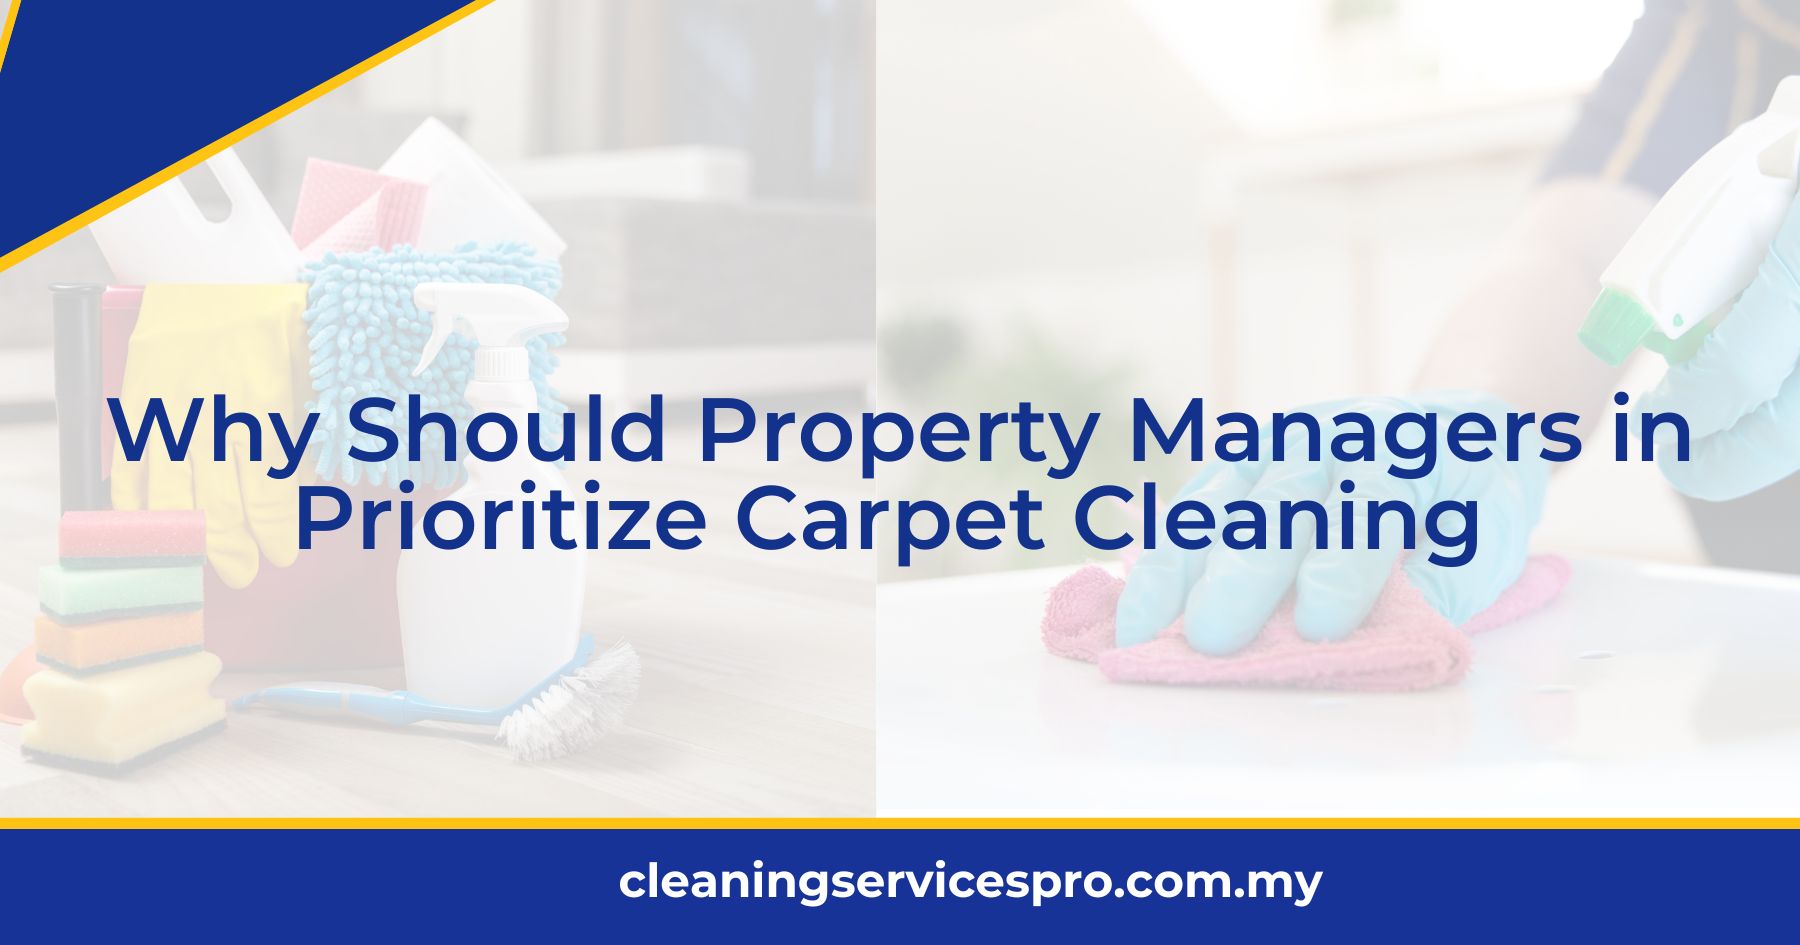 Why Should Property Managers in Prioritize Carpet Cleaning